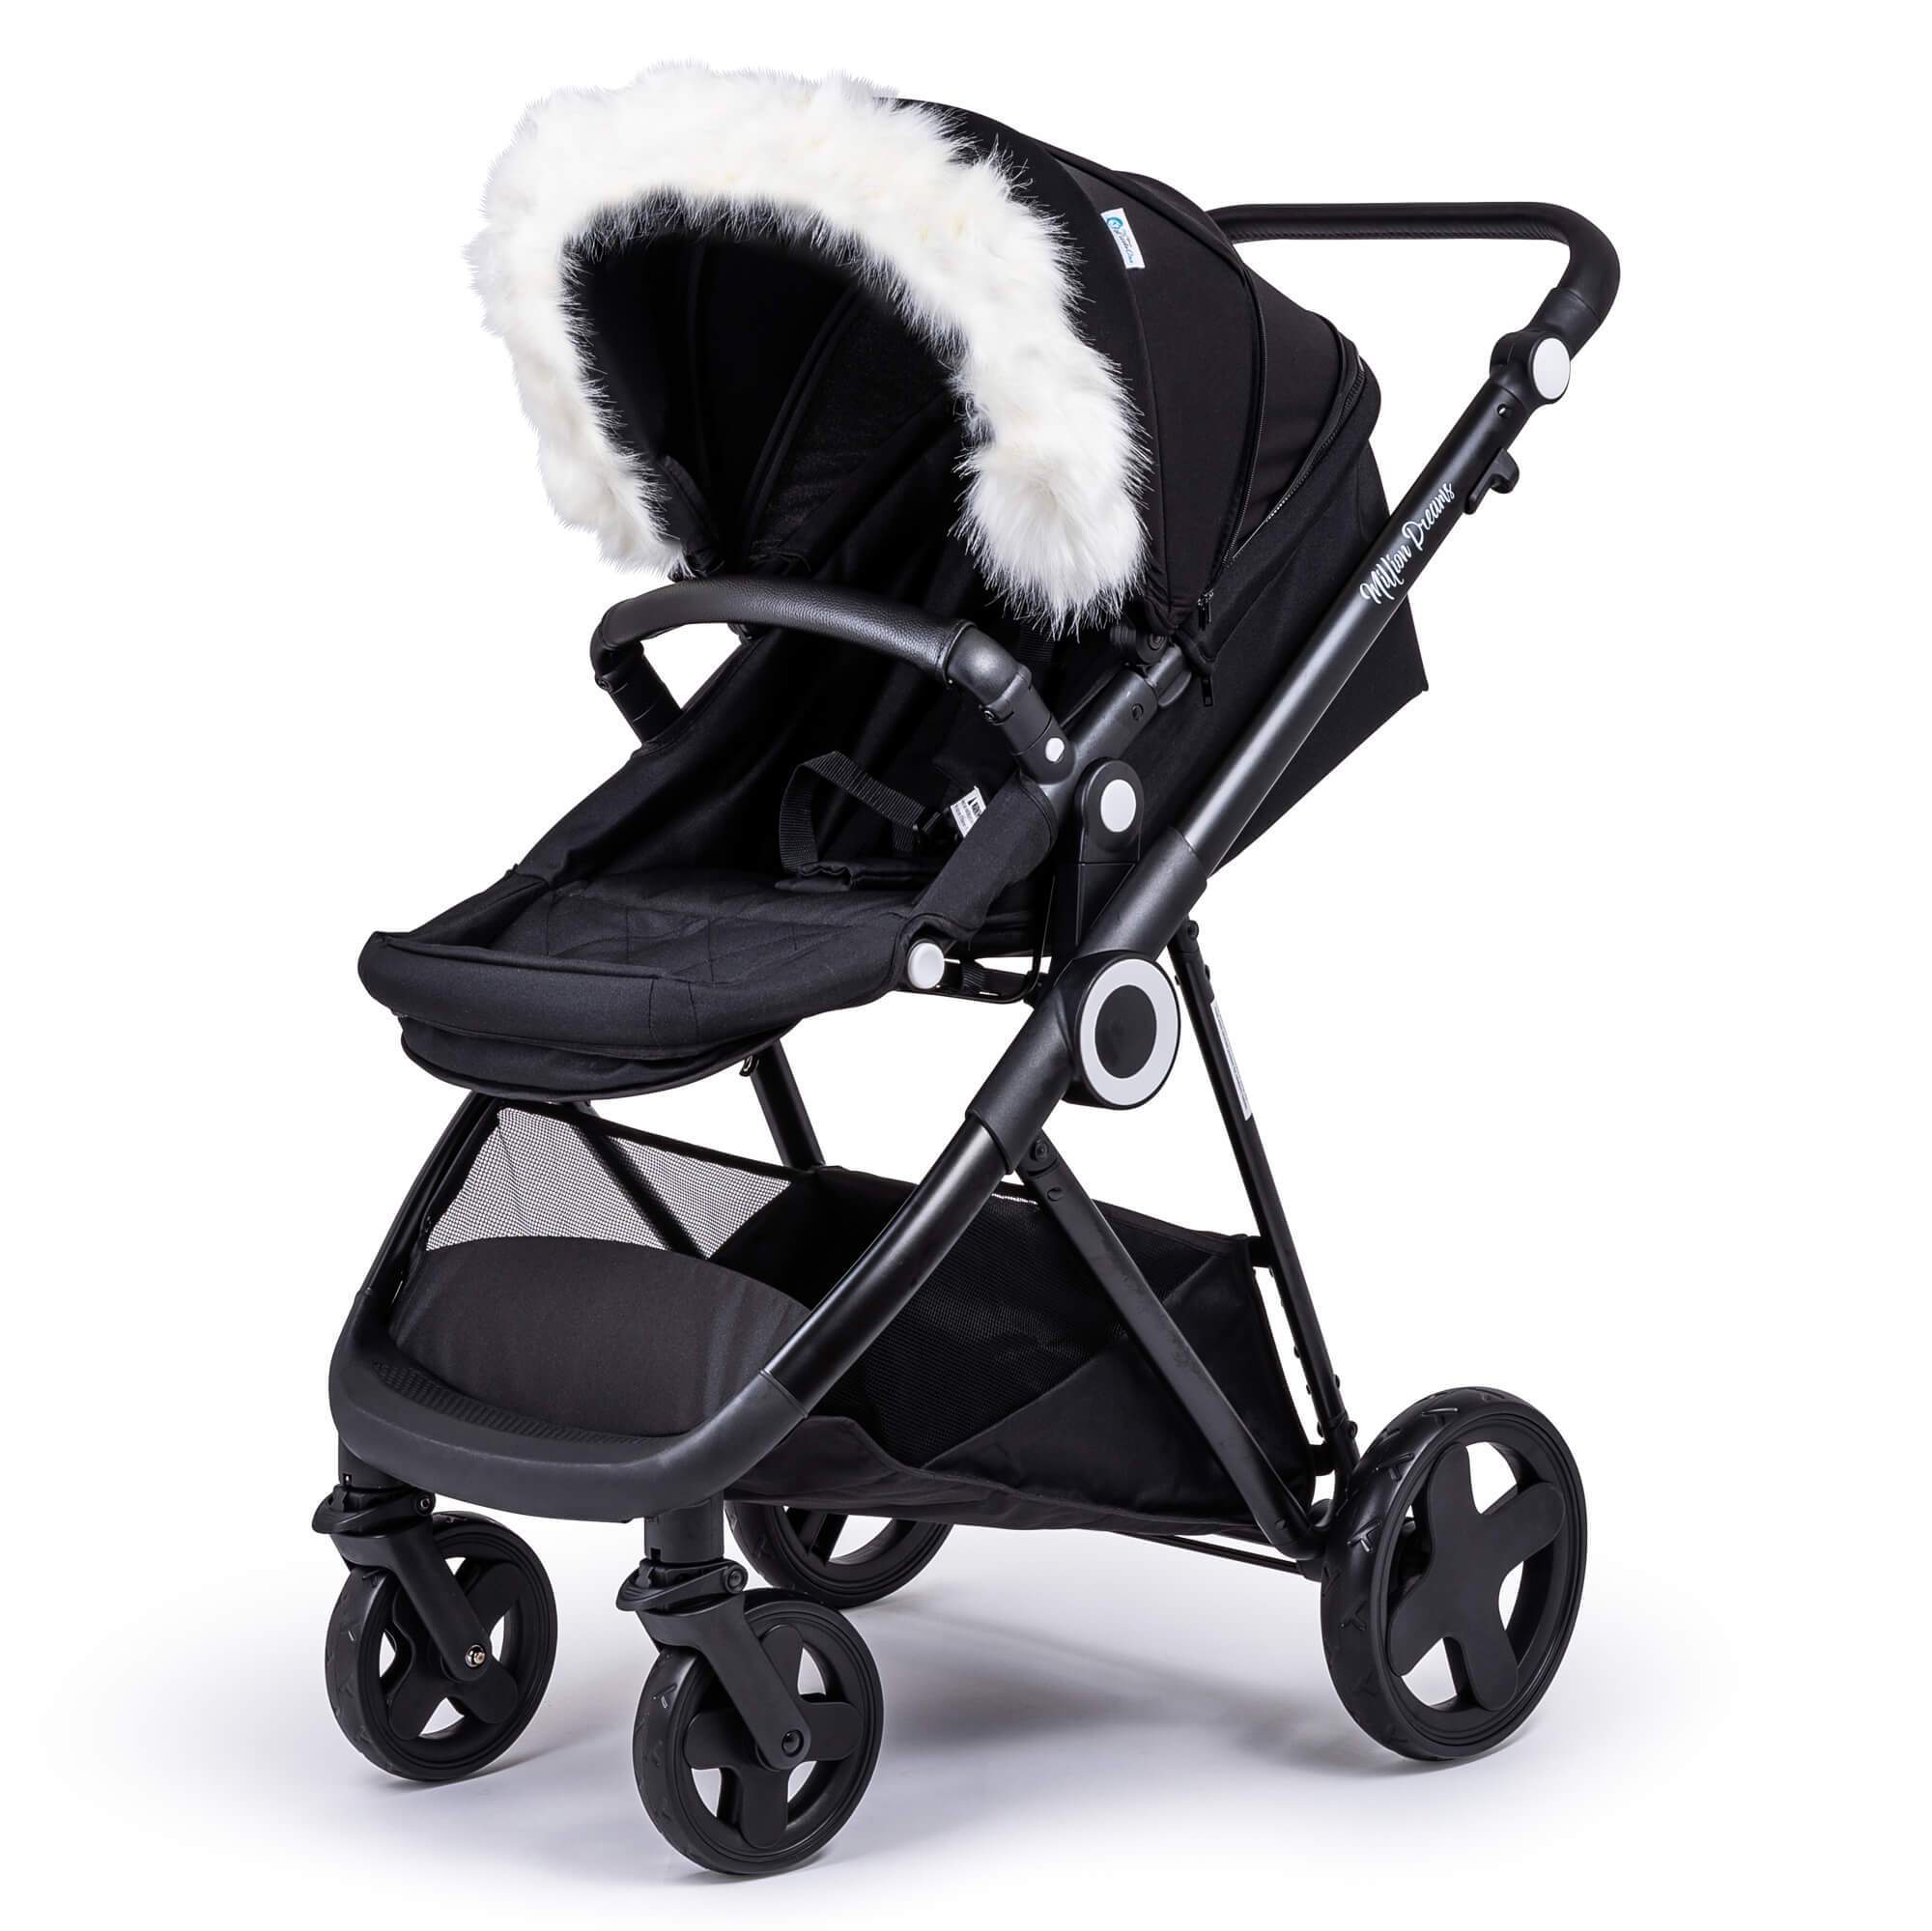 Pram Fur Hood Trim Attachment for Pushchair Compatible with My Babiie - White / Fits All Models | For Your Little One